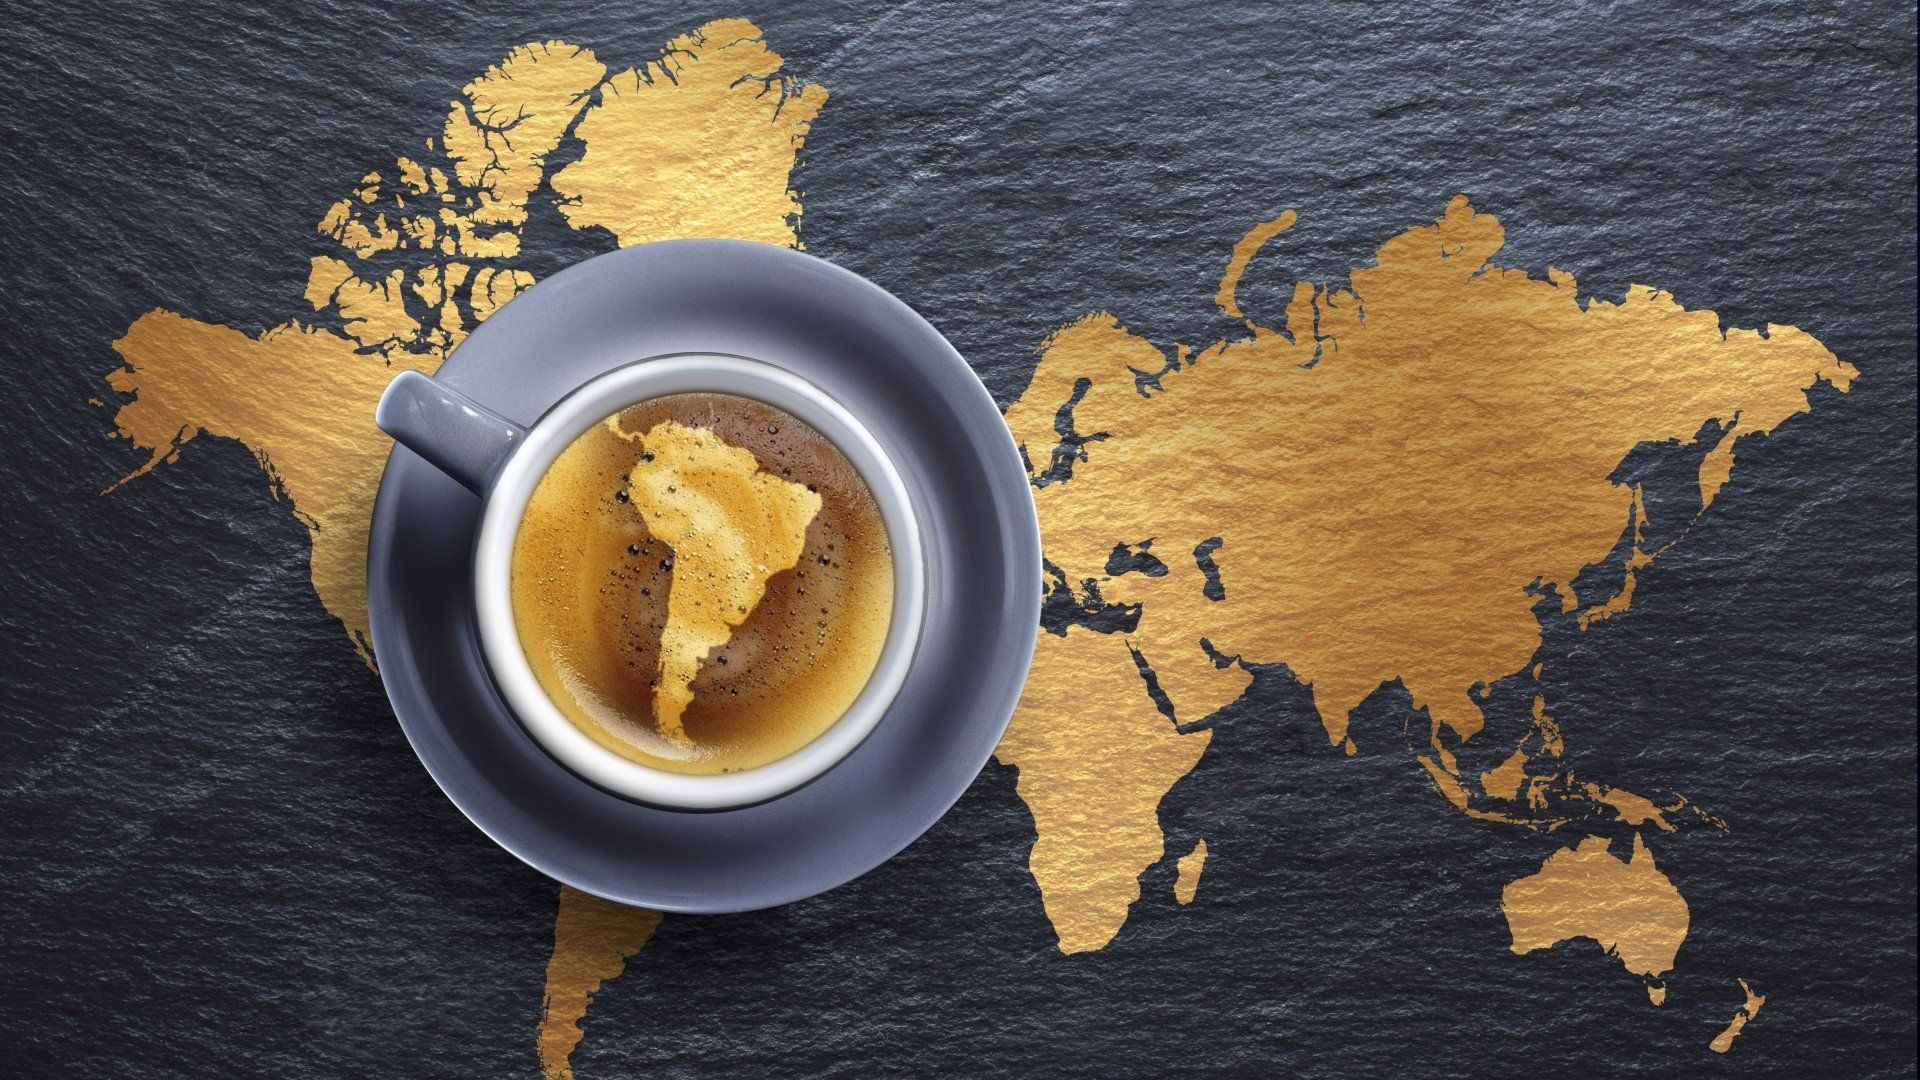 coffee, Map, Continents, Creative Design, Photo manipulation, South America, Earth, World, Brazil, Wood, Archer (TV show) Wallpaper HD / Desktop and Mobile Background